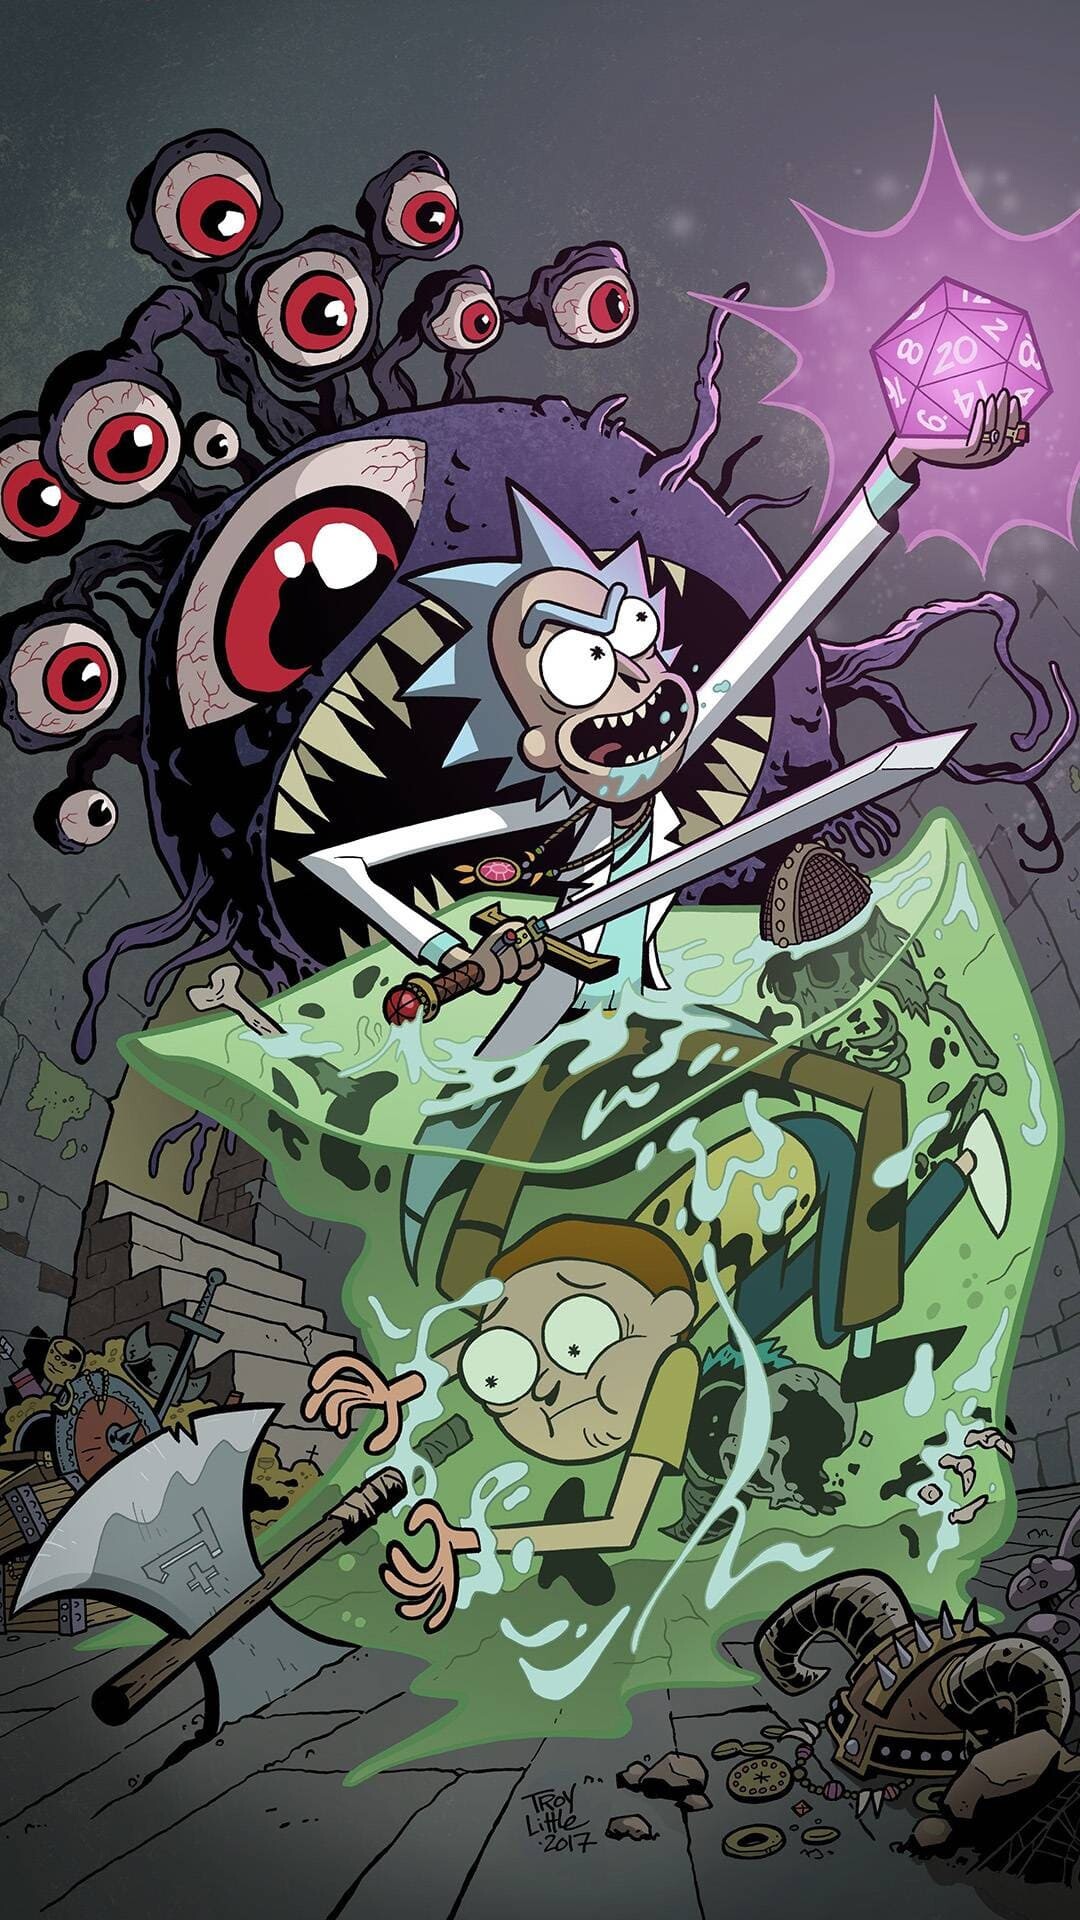 Rick and Morty: The show airs on Adult Swim, Animated sitcom. 1080x1920 Full HD Wallpaper.